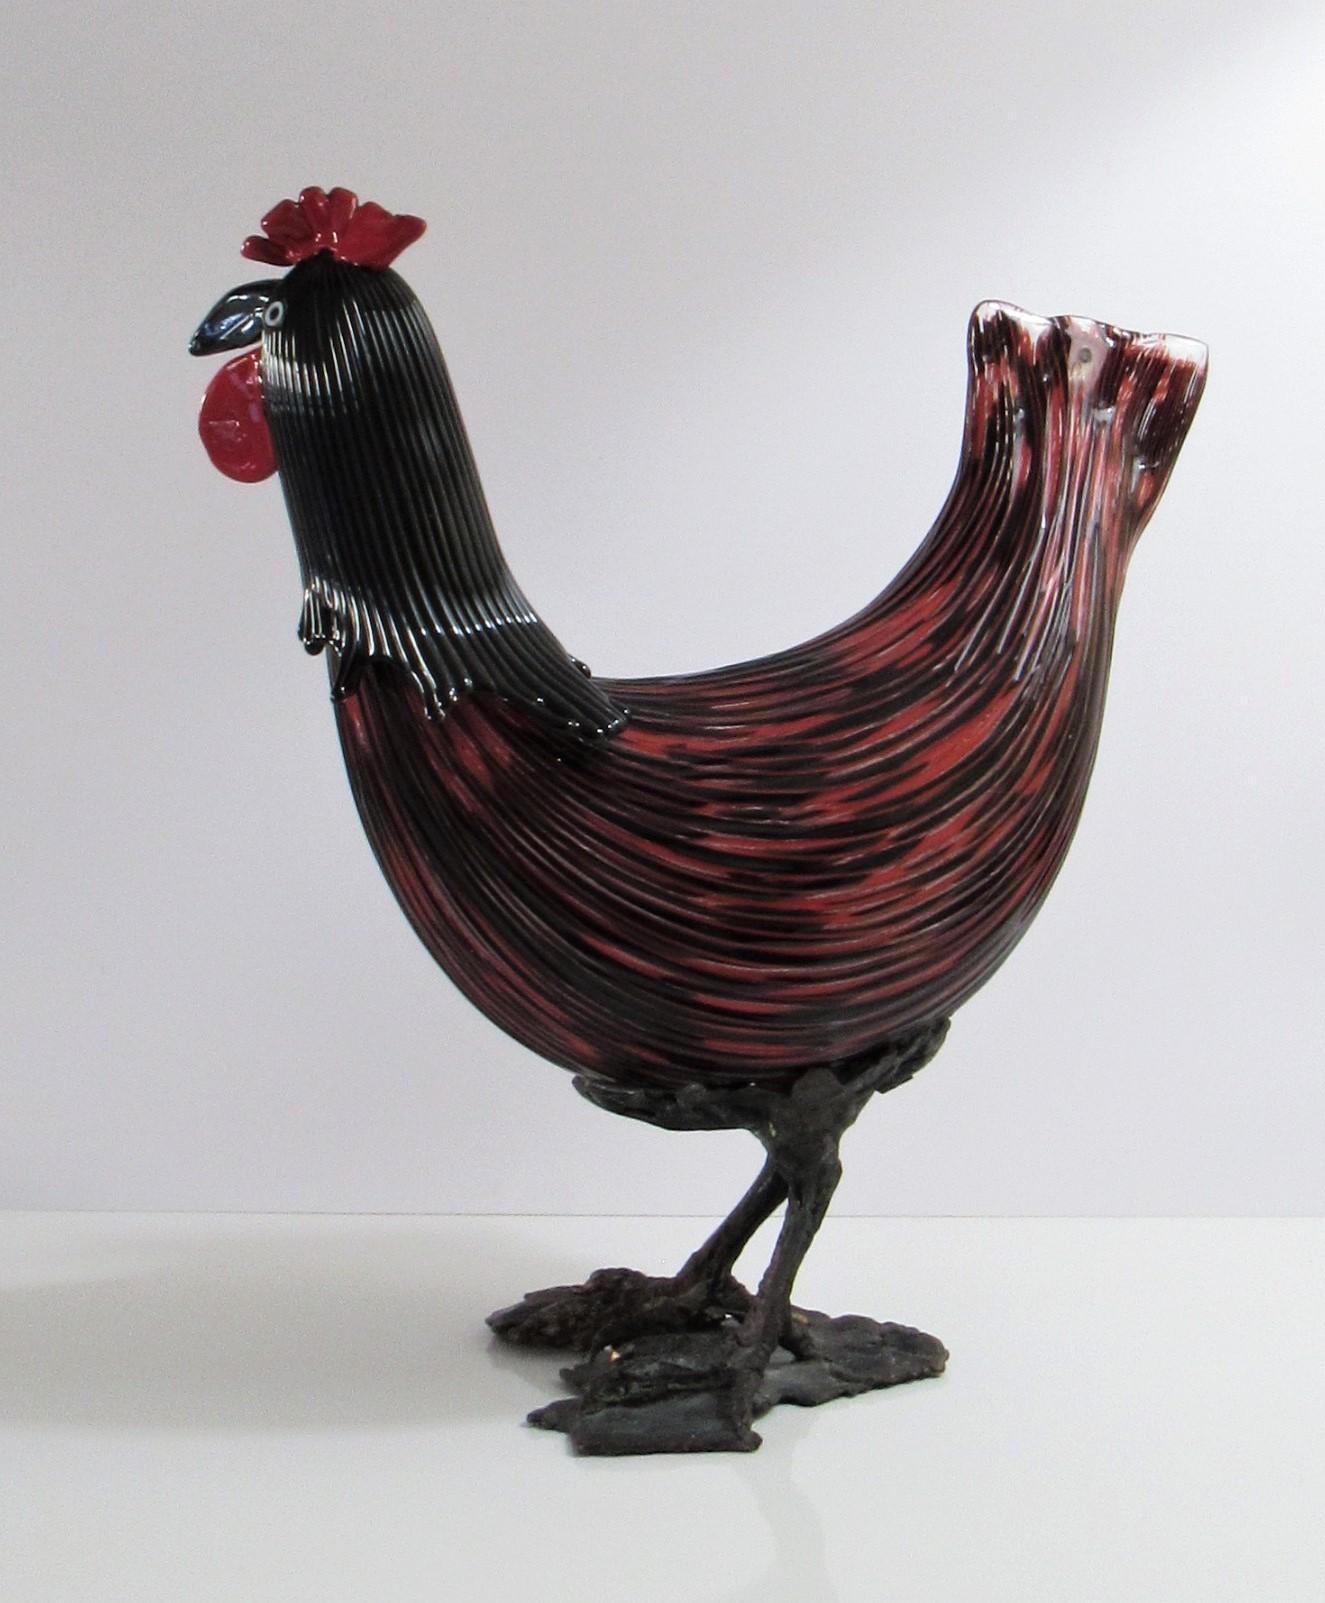 Toni Zuccheri for Venini Murano Glass Sculpture of a Rooster, Signed, 1979

Offered is a fine and rare sculpture of a rooster from a series of birds designed by Toni Zuccheri for Venini in 1964 and presented at the 32nd Venice Biennale. Made of red